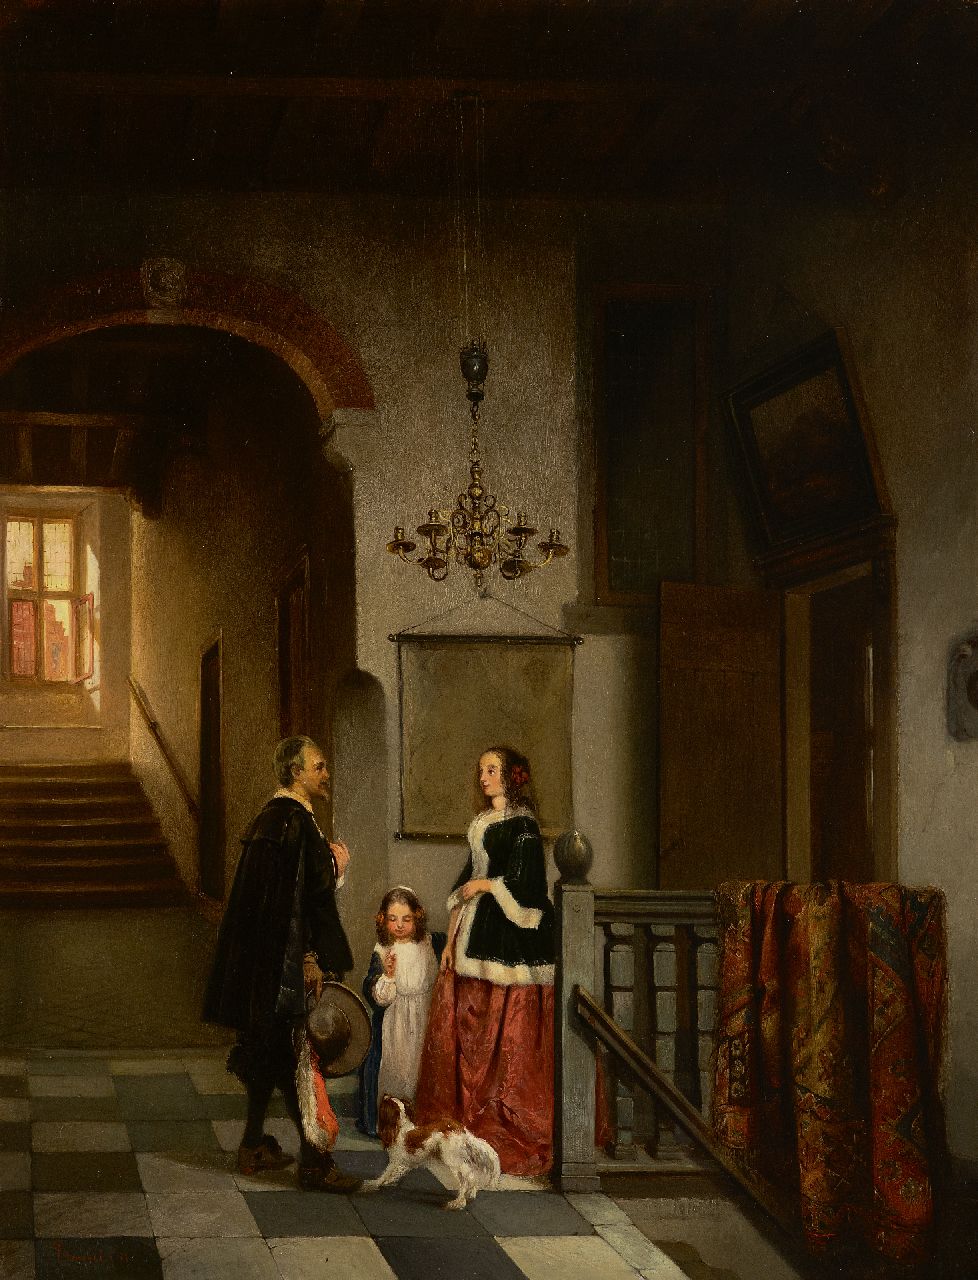 Stroebel J.A.B.  | Johannes Anthonie Balthasar Stroebel | Paintings offered for sale | Figures in a 17th century Dutch interior, oil on panel 49.9 x 41.0 cm, signed l.l. and dated '91